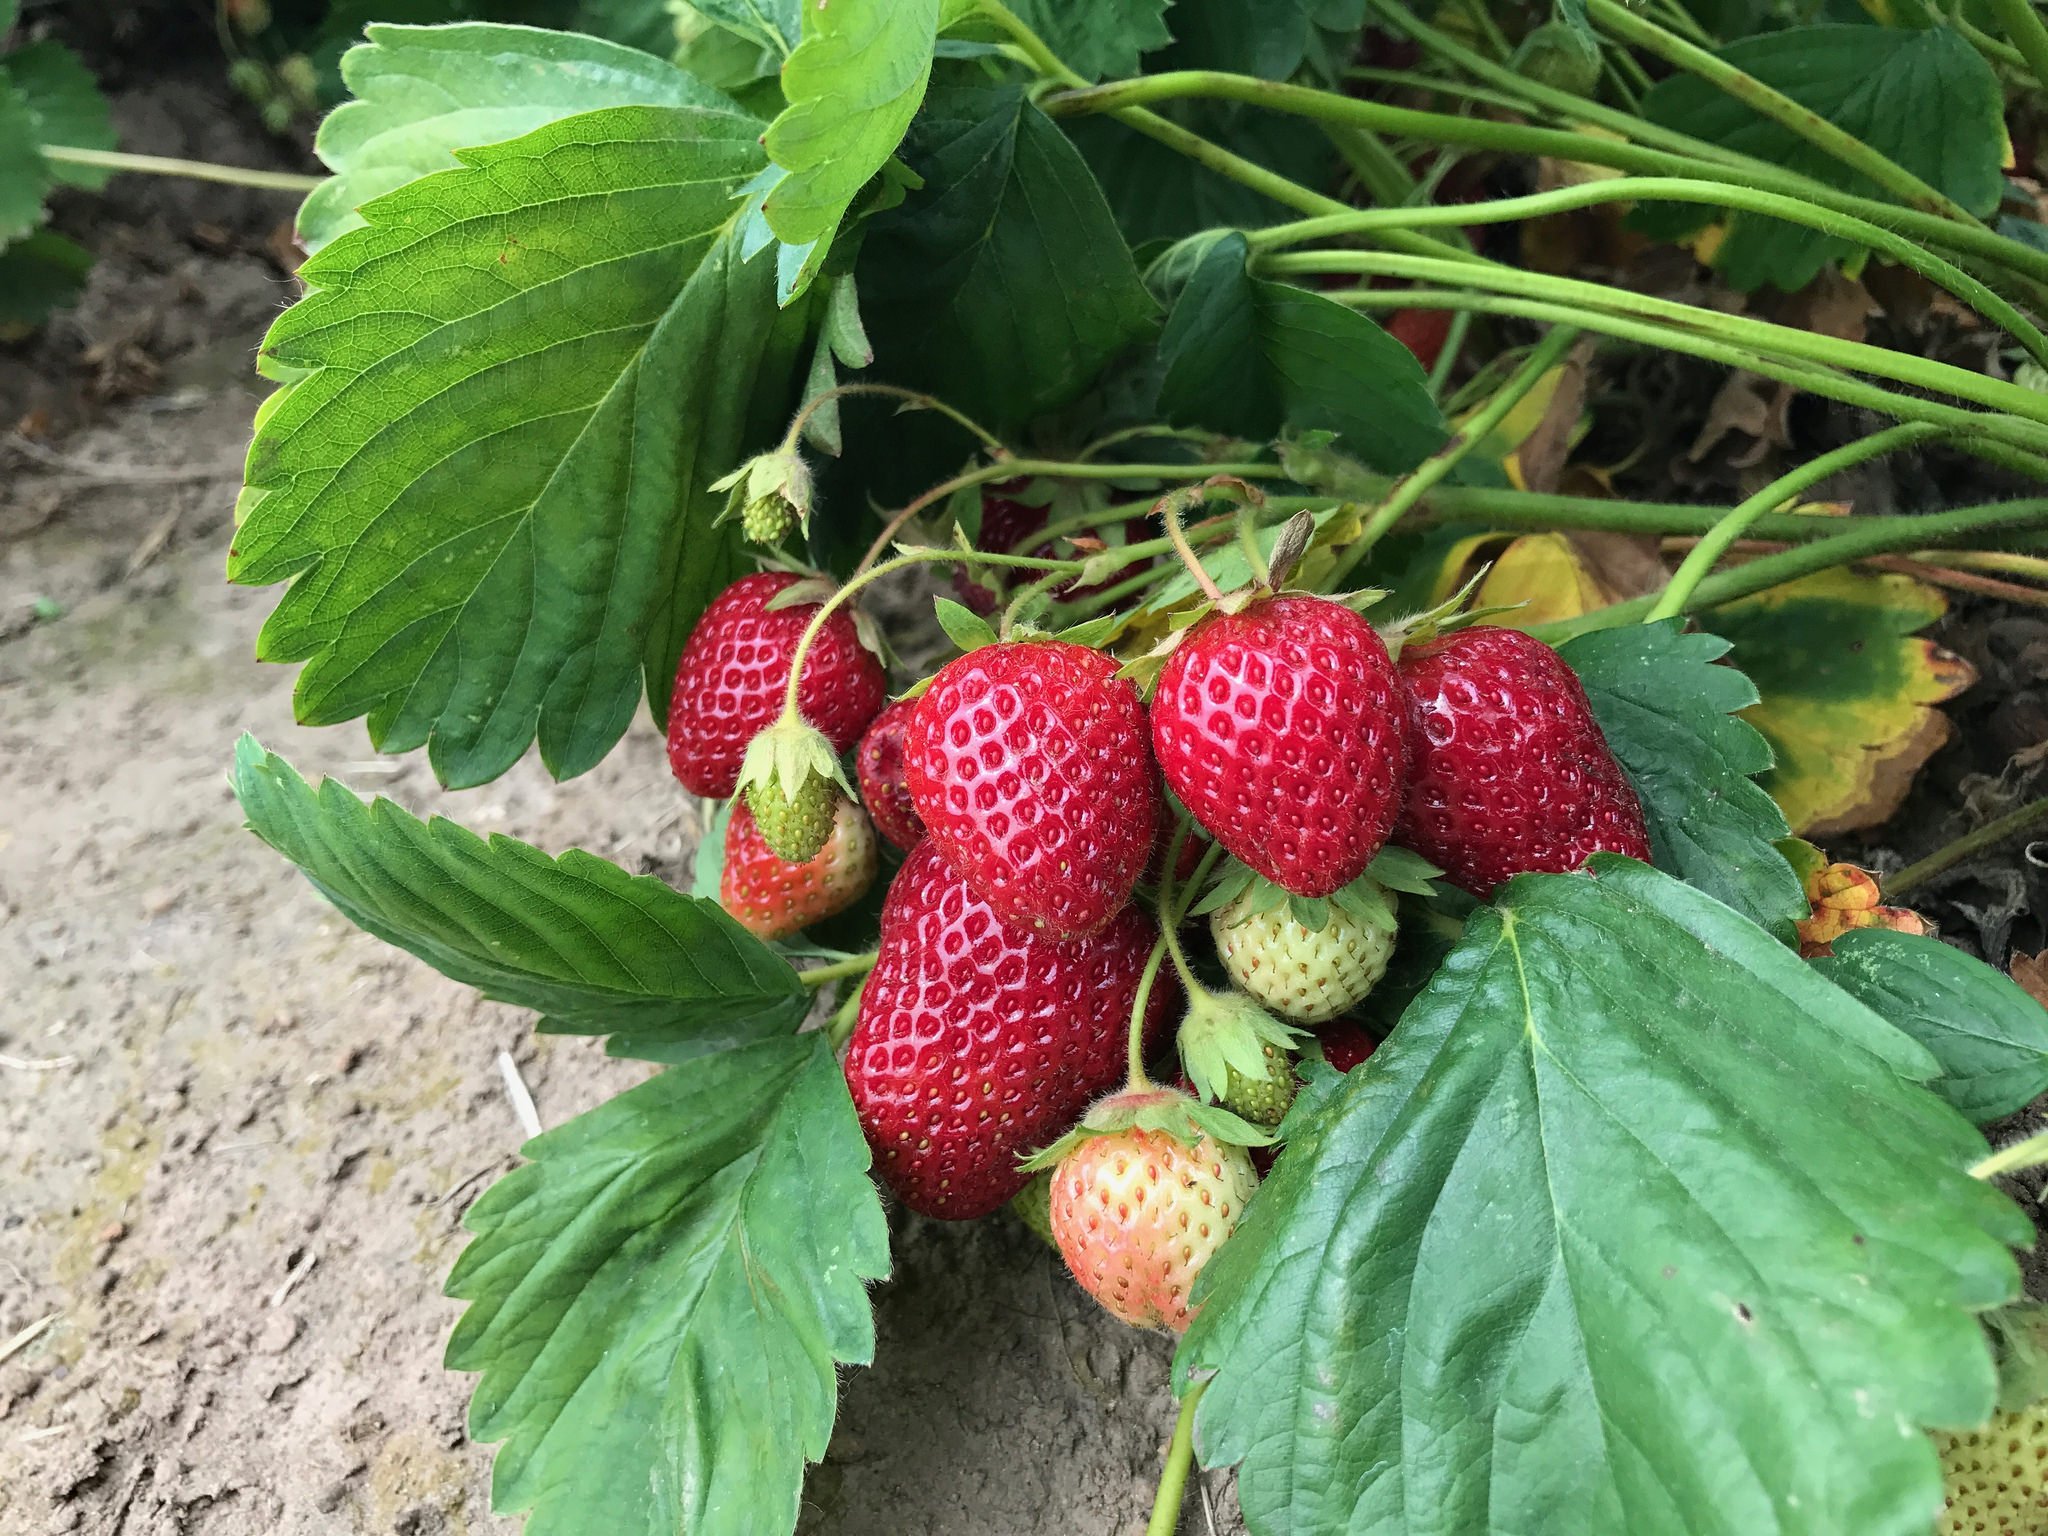 Grow your own strawberries for sweet satisfaction